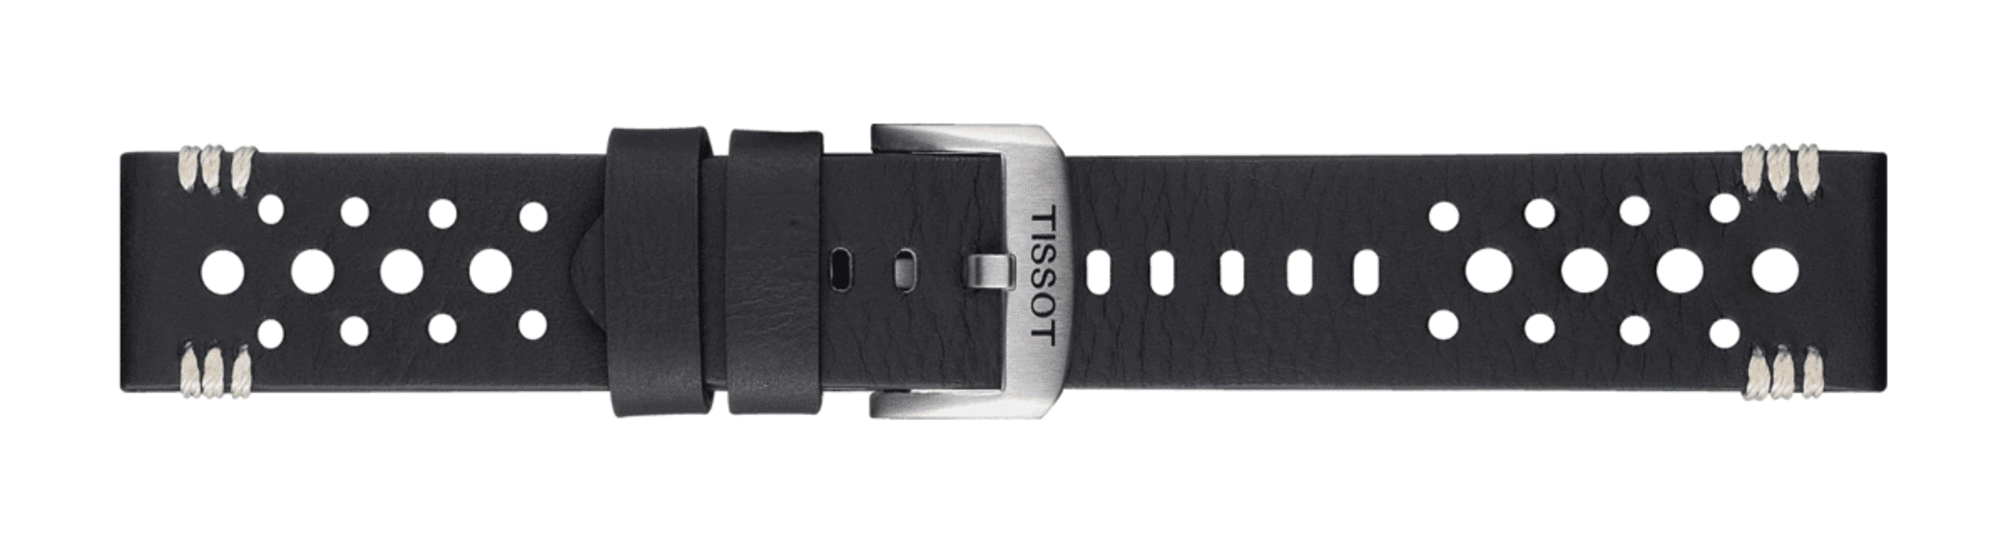 TISSOT T852.046.810 OFFICIAL BLACK LEATHER STRAP LUGS 22 MM